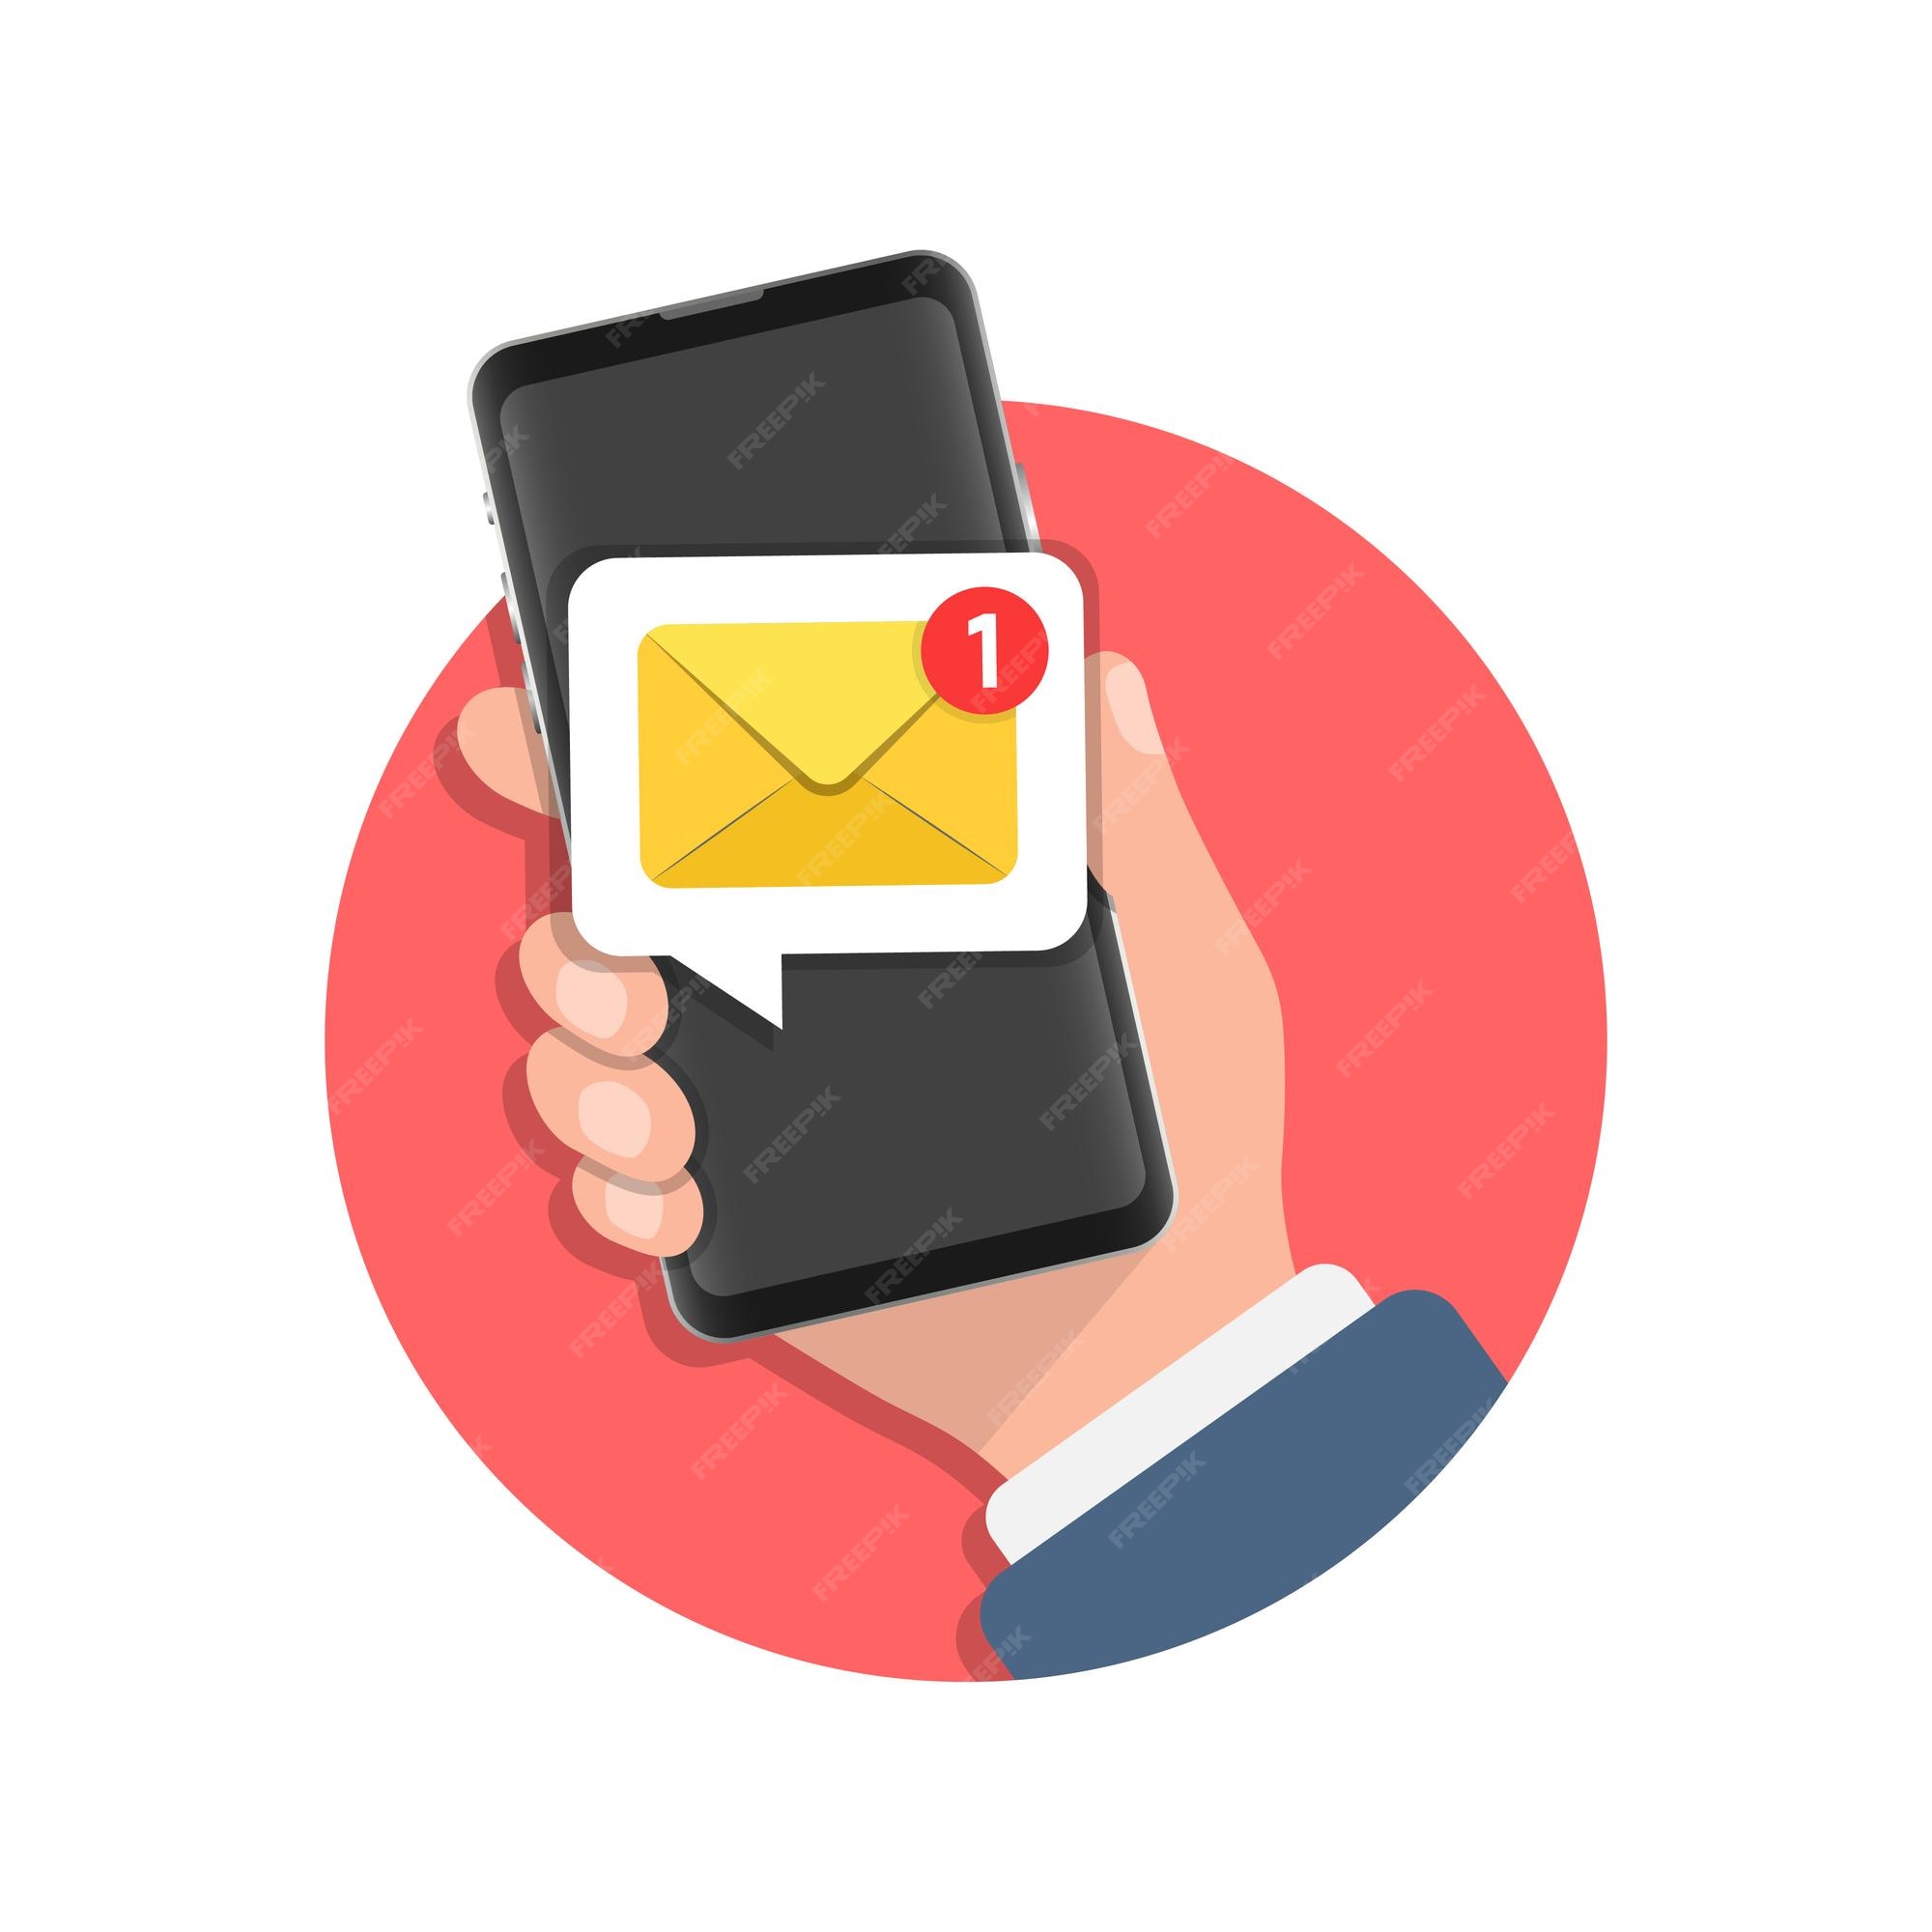 https://img.freepik.com/premium-vector/hand-holding-smartphone-icon-flat-style-incoming-message-vector-illustration-isolated-background-email-notification-sign-business-concept_157943-3927.jpg?w=2000